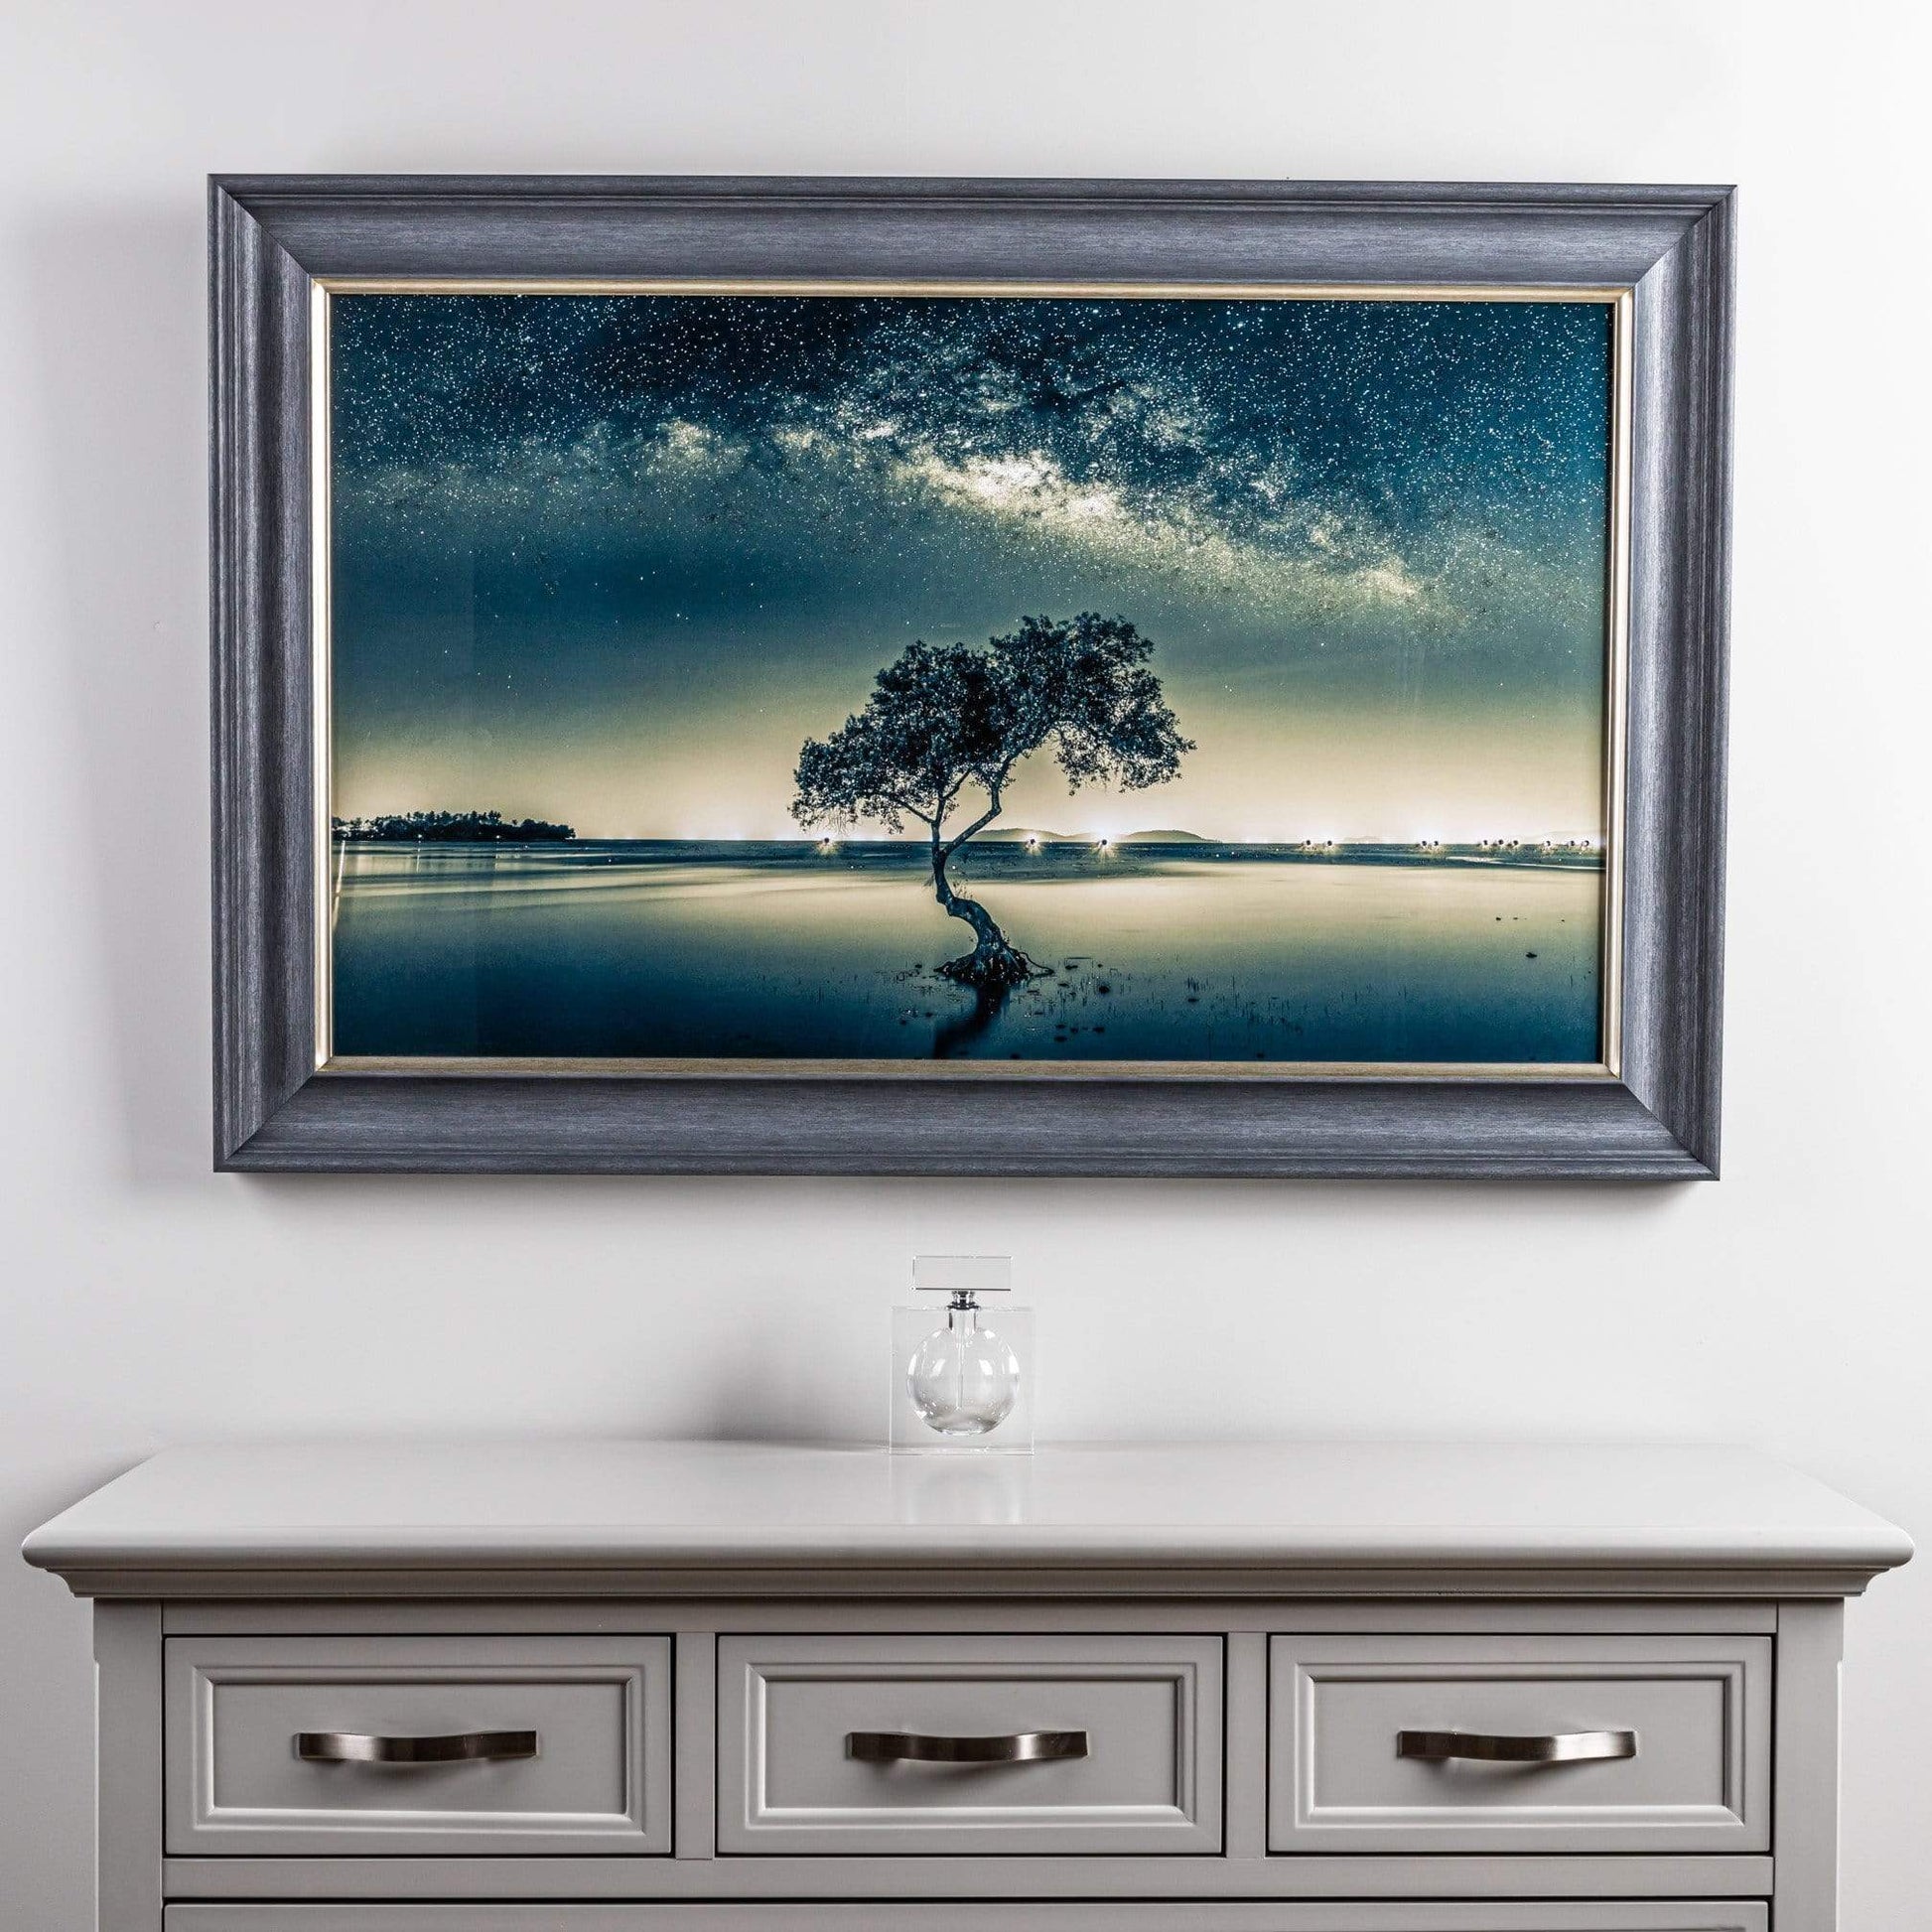 Pictures  -  Sea Tree Framed Picture  -  50152126